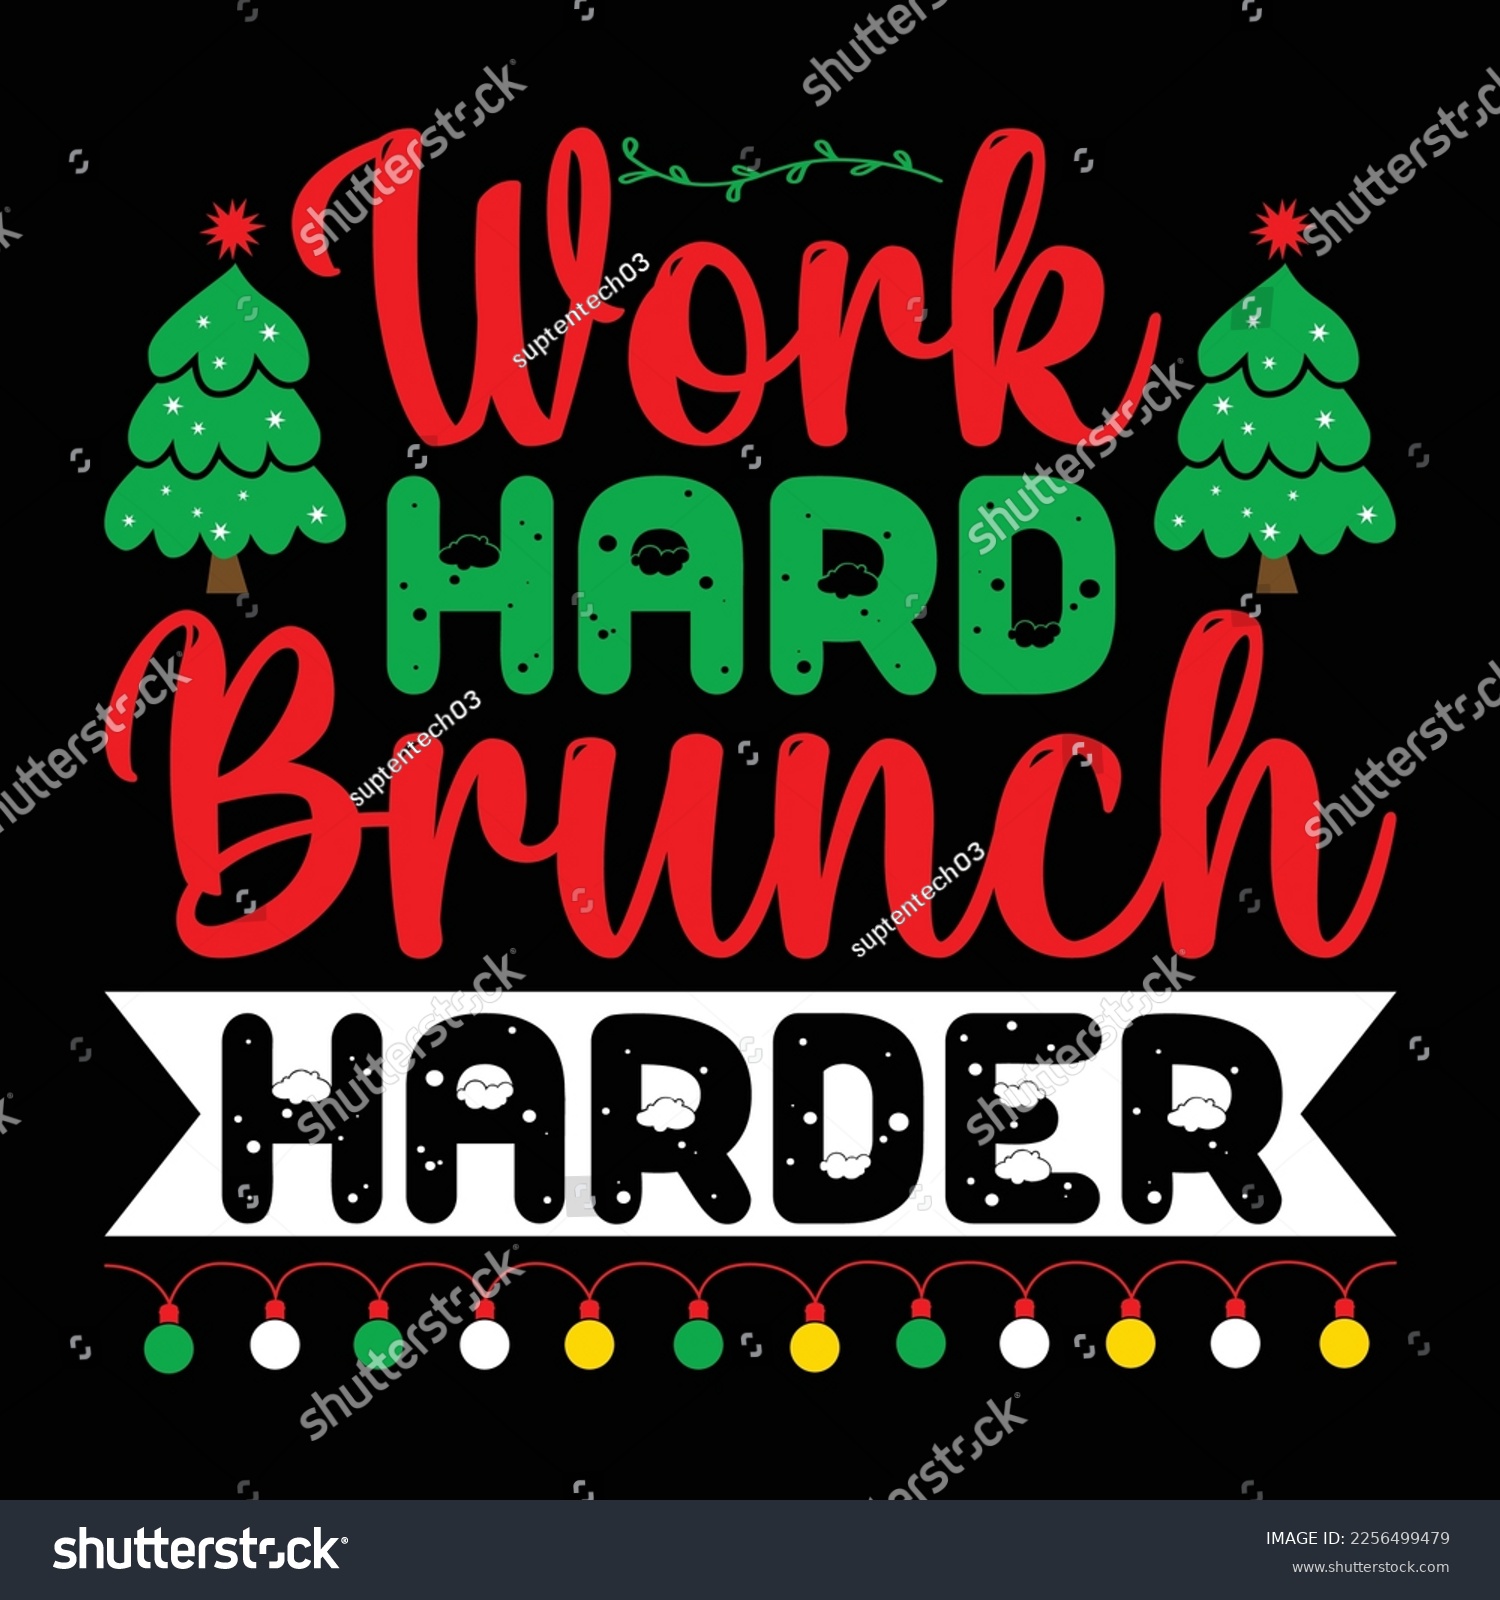 SVG of Work Hard Brunch Harder, Merry Christmas shirts Print Template, Xmas Ugly Snow Santa Clouse New Year Holiday Candy Santa Hat vector illustration for Christmas hand lettered svg